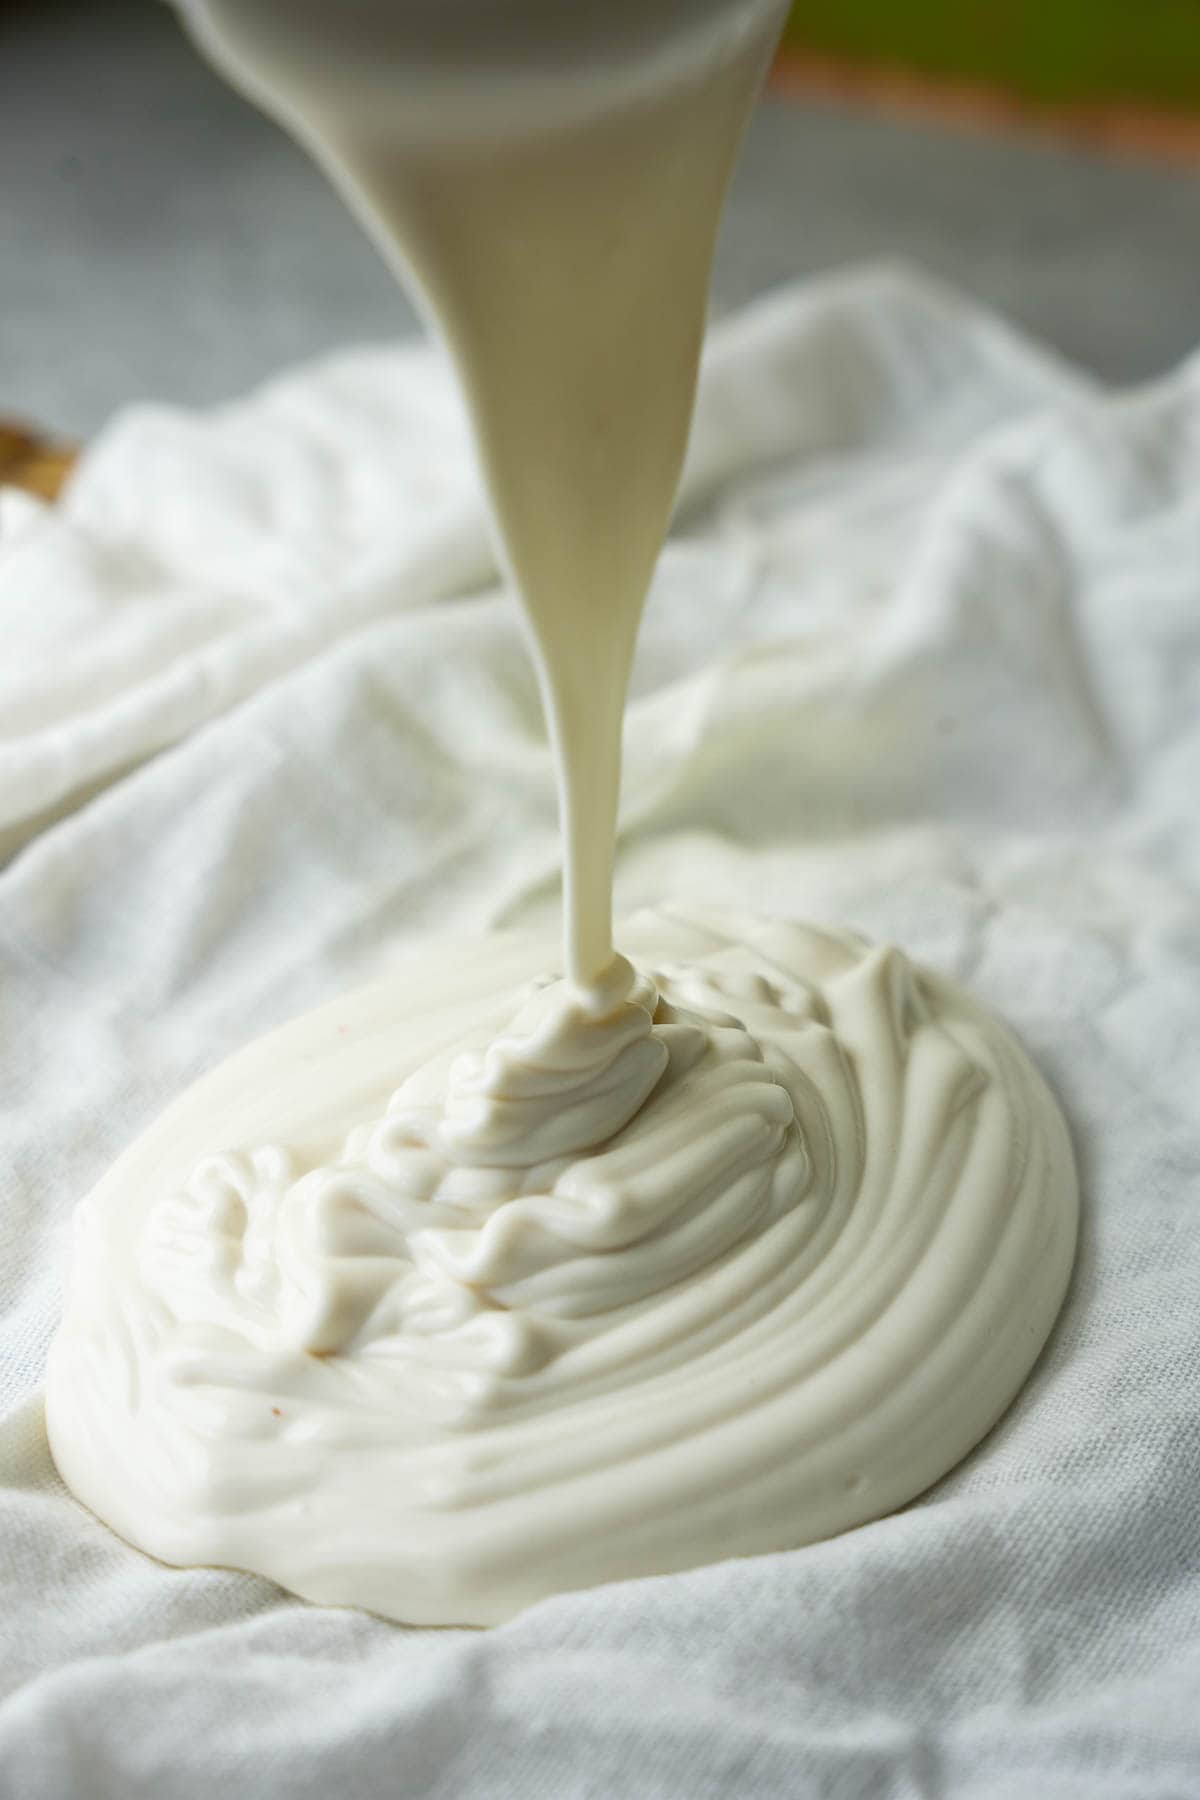 the salted yogurt mixture is pored into prepared clean cheesecloth.